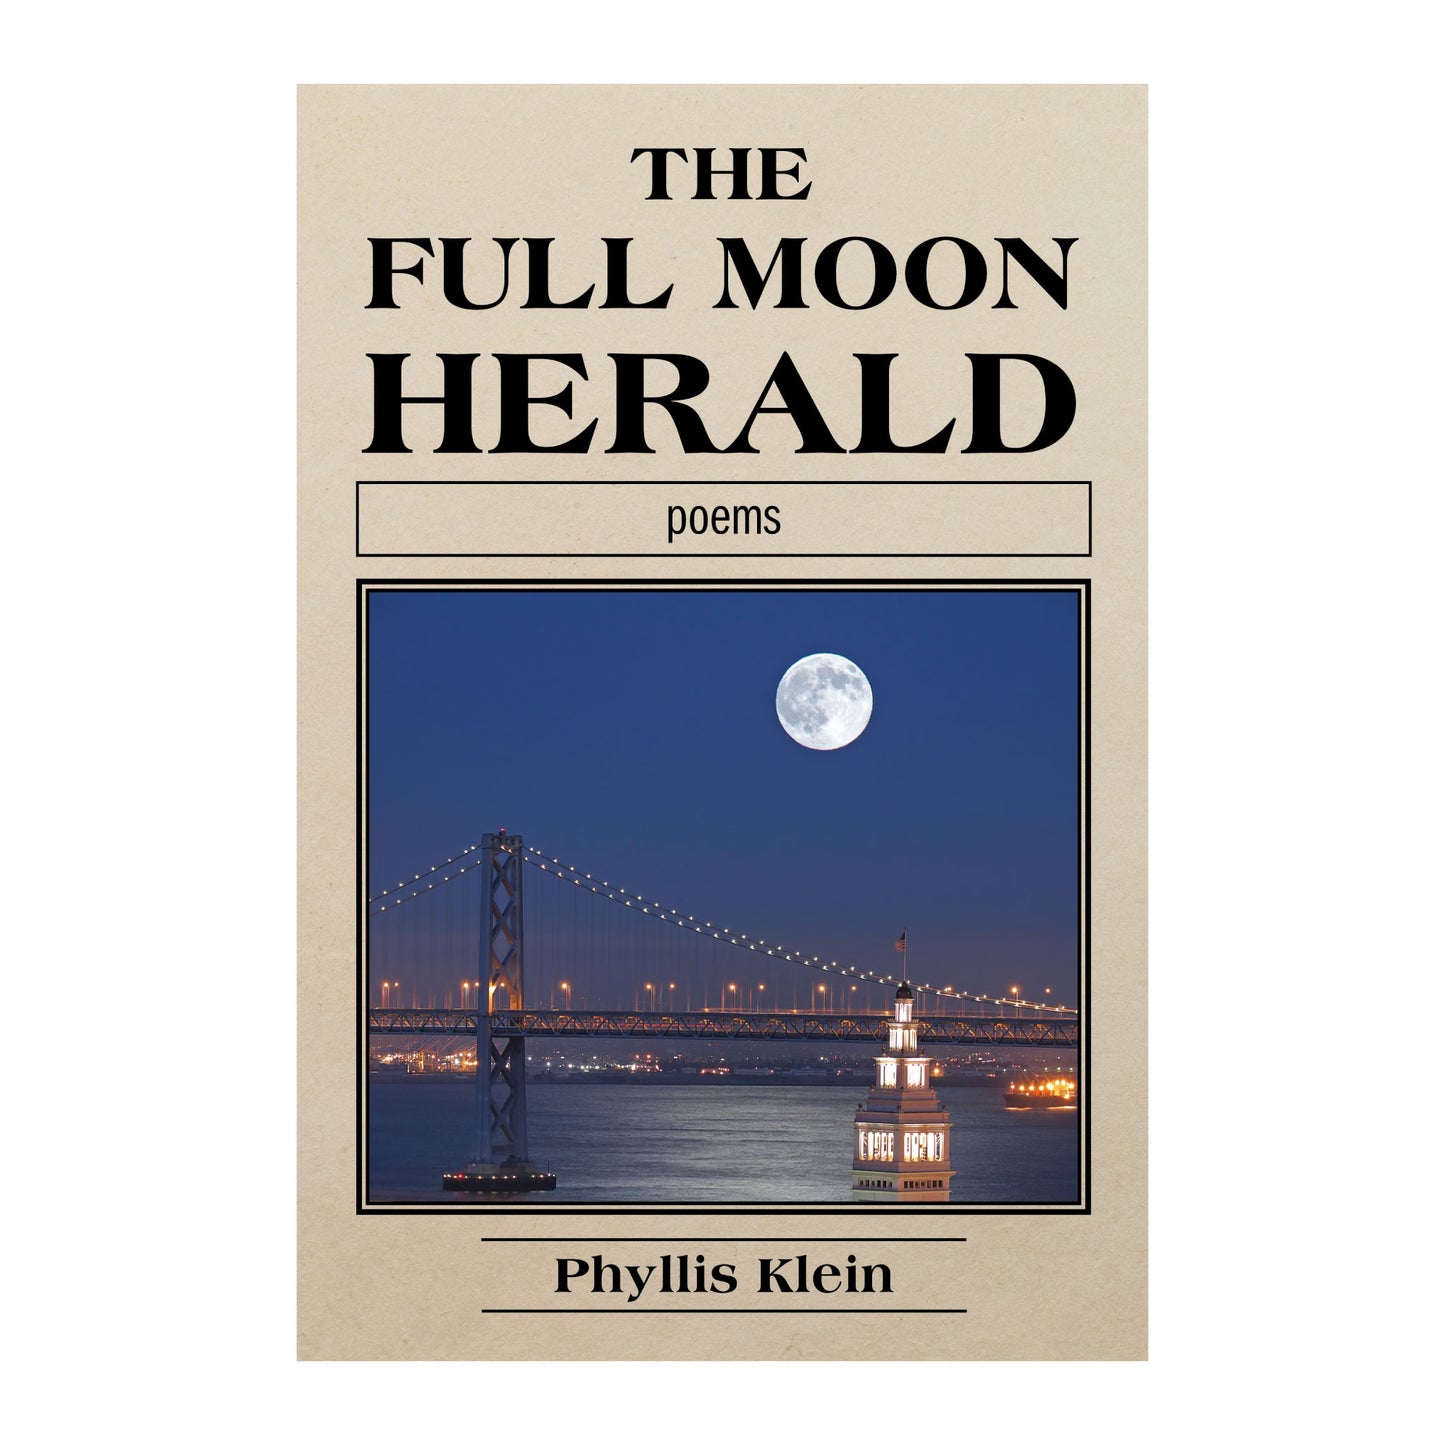 The Full Moon Herald by Phyllis Klein